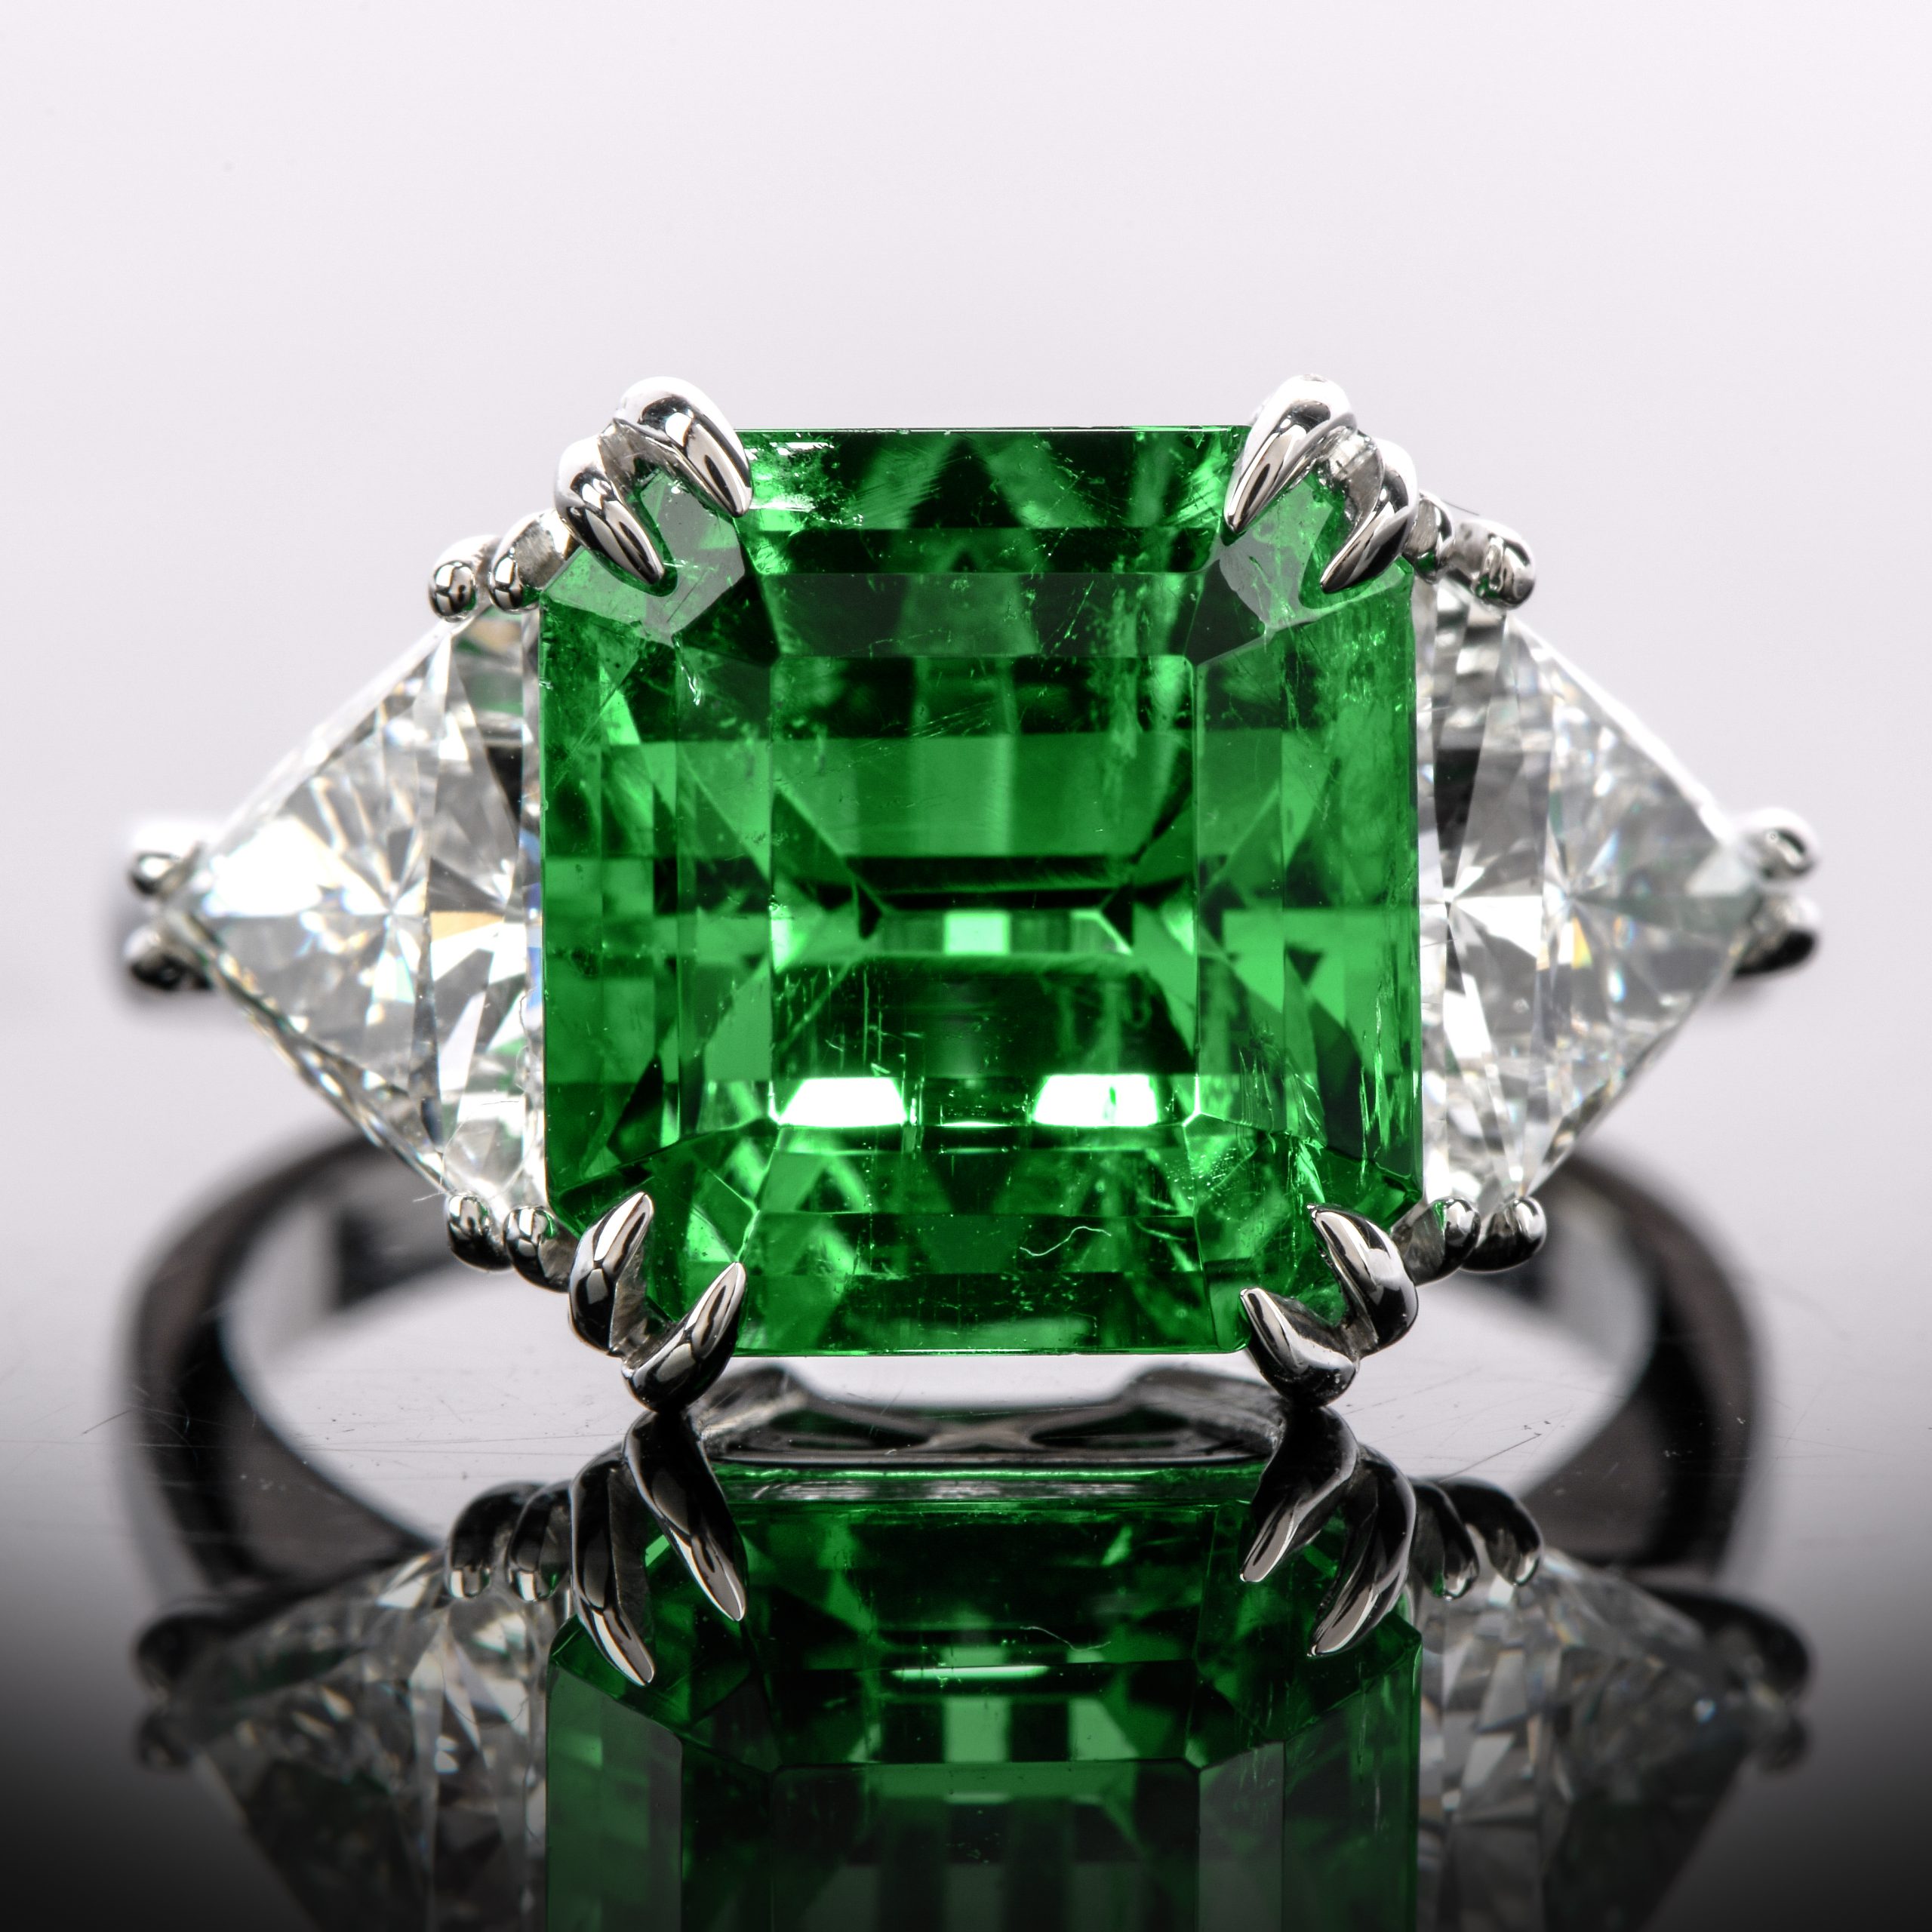 https://www.doverjewelry.com/estate-mayors-certified-3-03ct-colombian-emerald-diamond-platinum-cocktail-ring.html